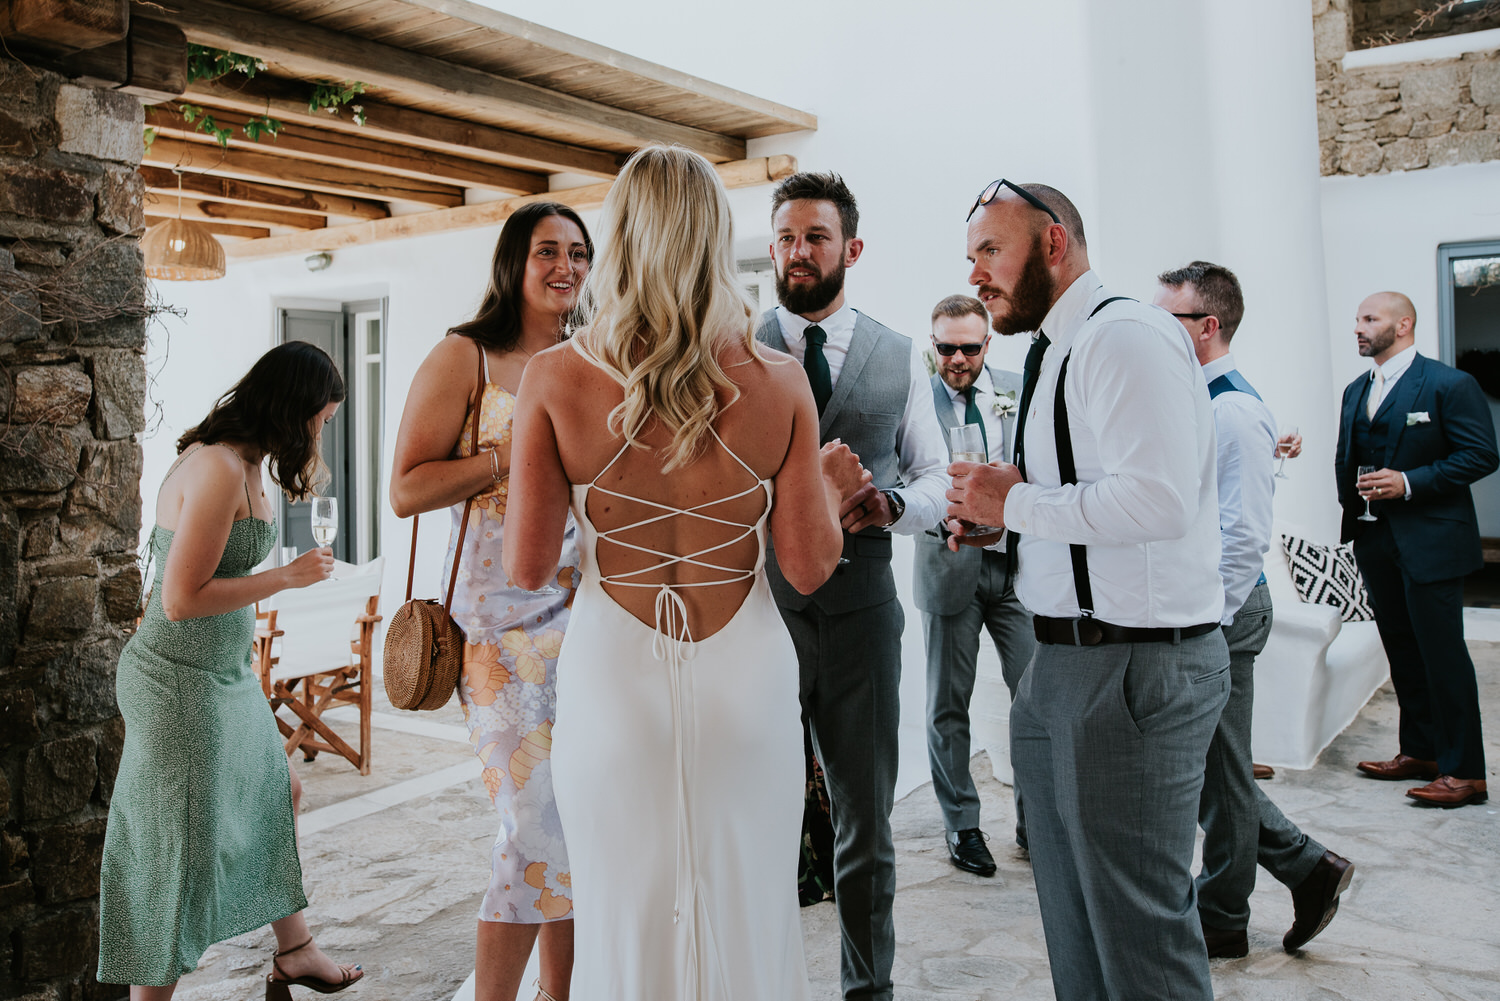 Mykonos wedding photographer: bride with her back towards the camera talking to the groom and friends in front of the villa.